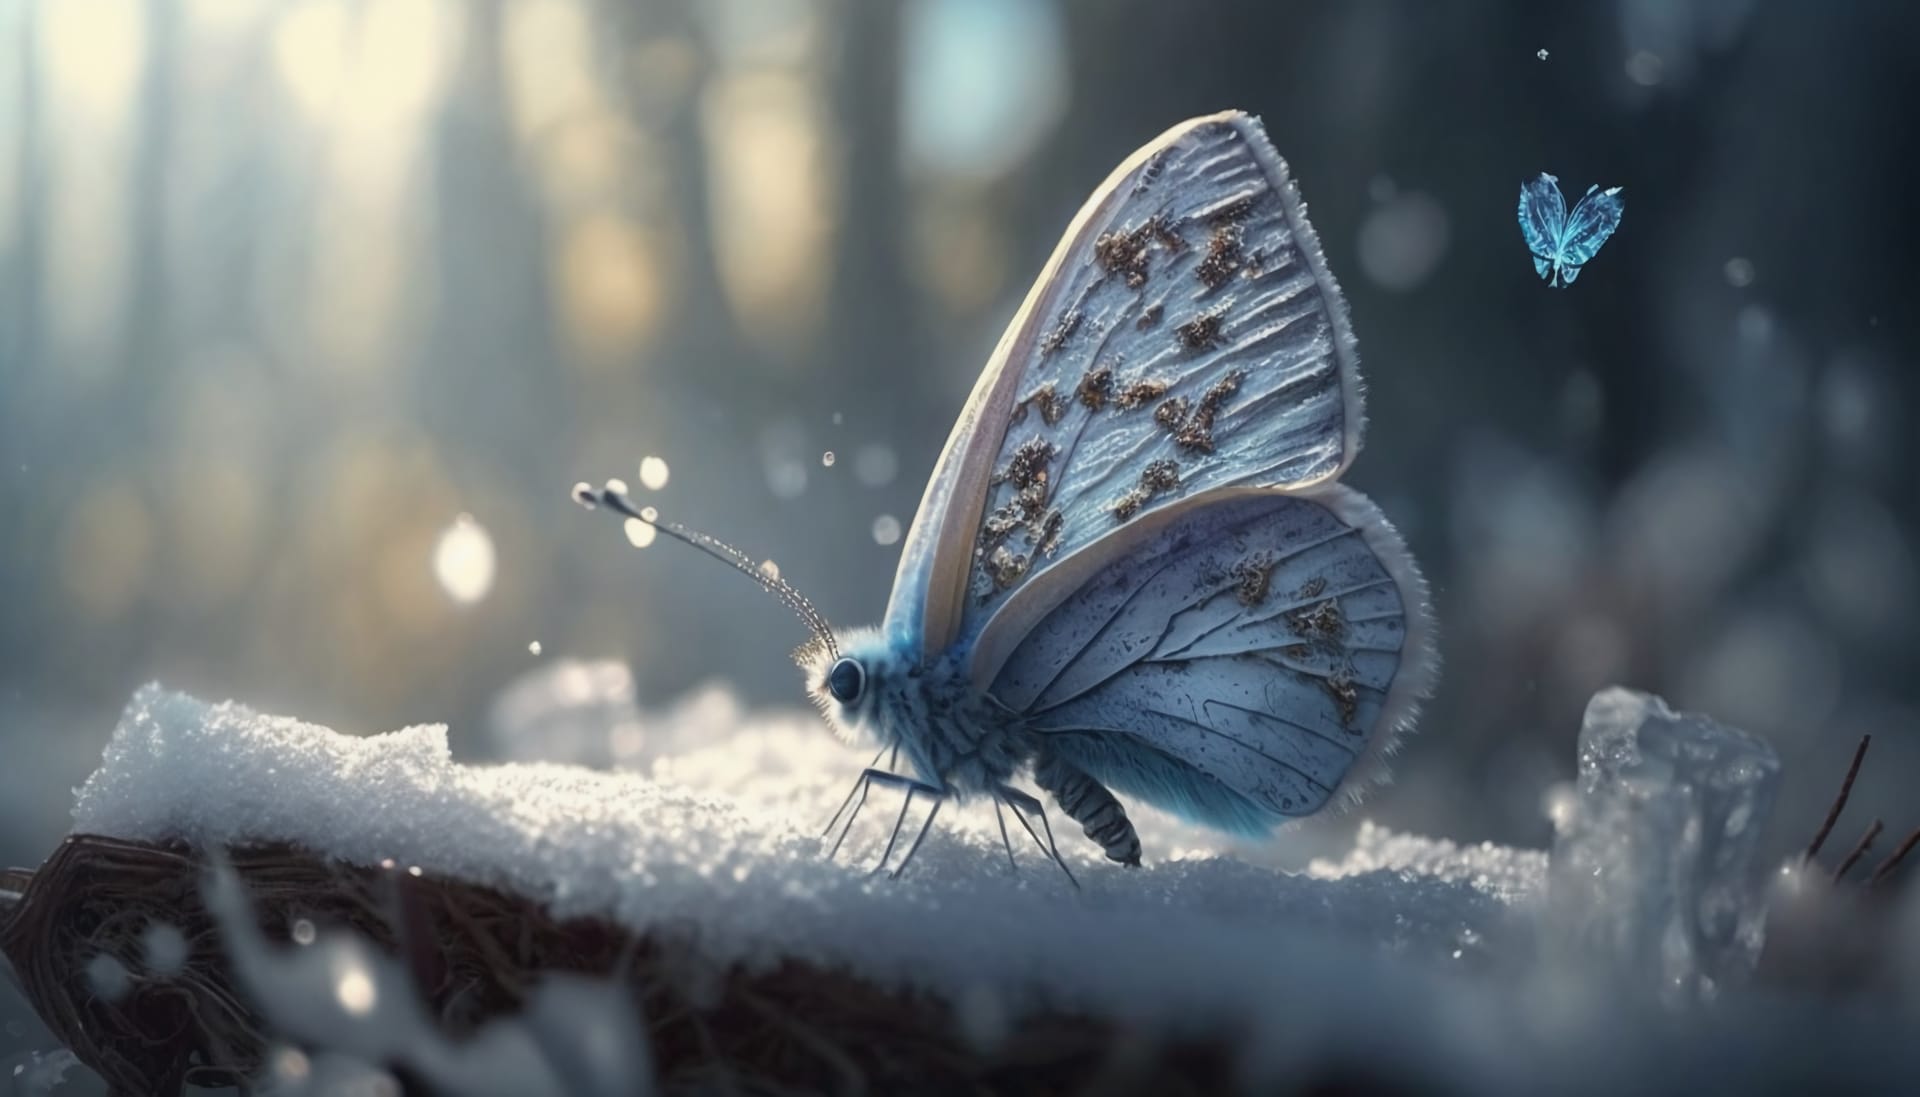 Ice snowa light blue ice butterfly falls fine picture